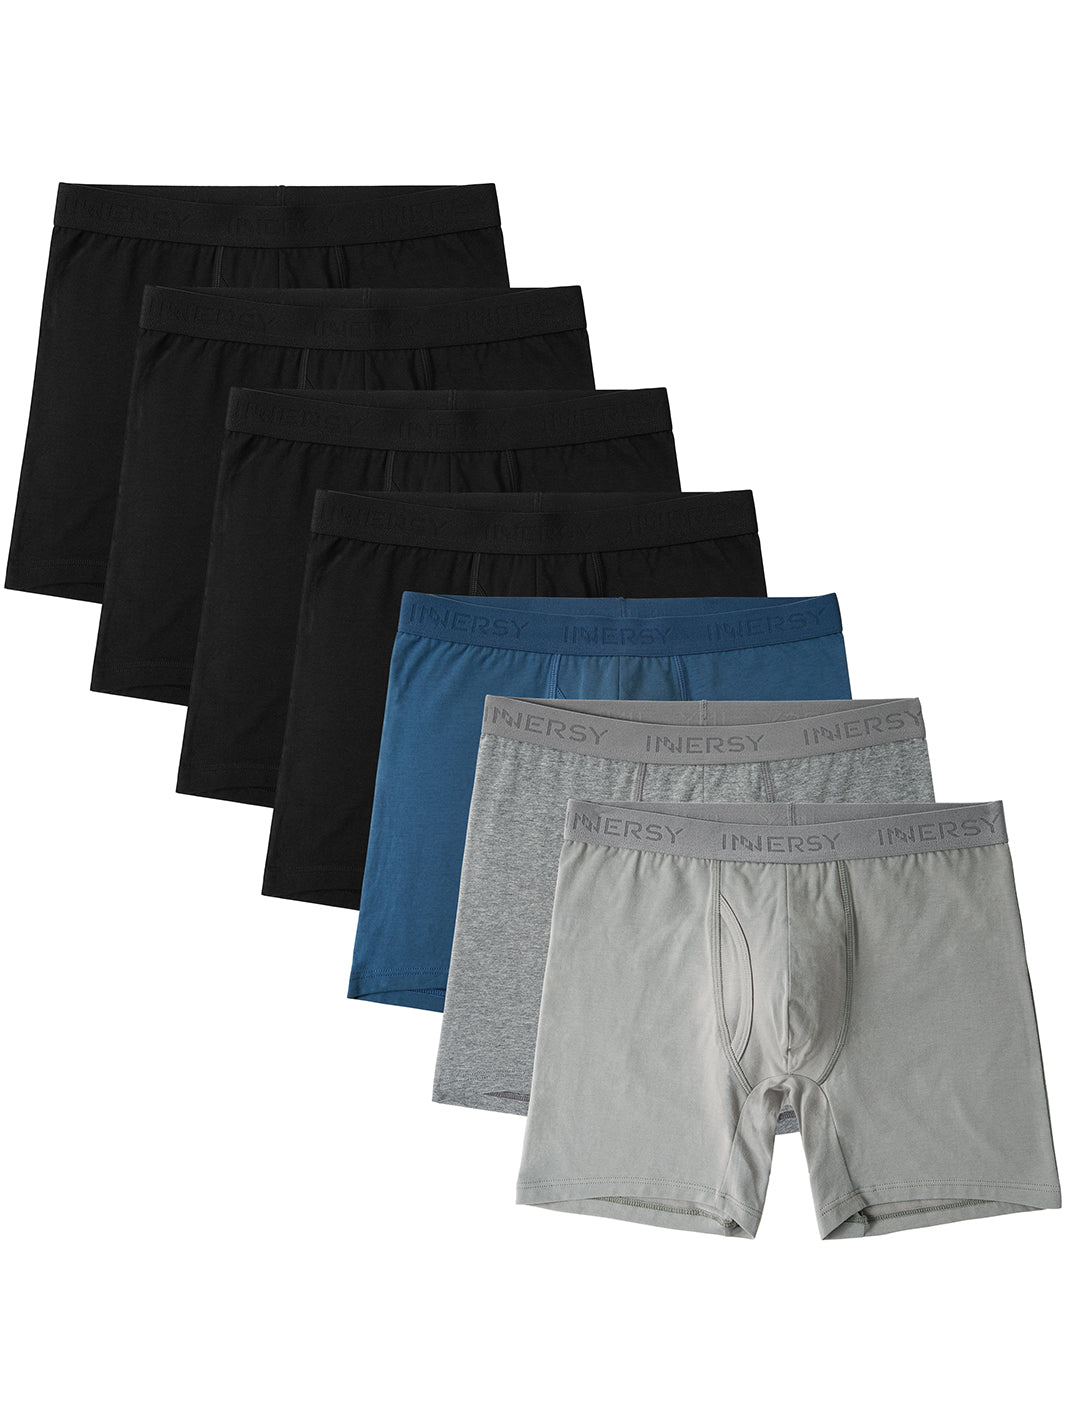 INNERSY Men's Boxer Briefs Cotton Stretchy Underwear 7 Pack for a  Week(Rainbow Colors, Medium) 